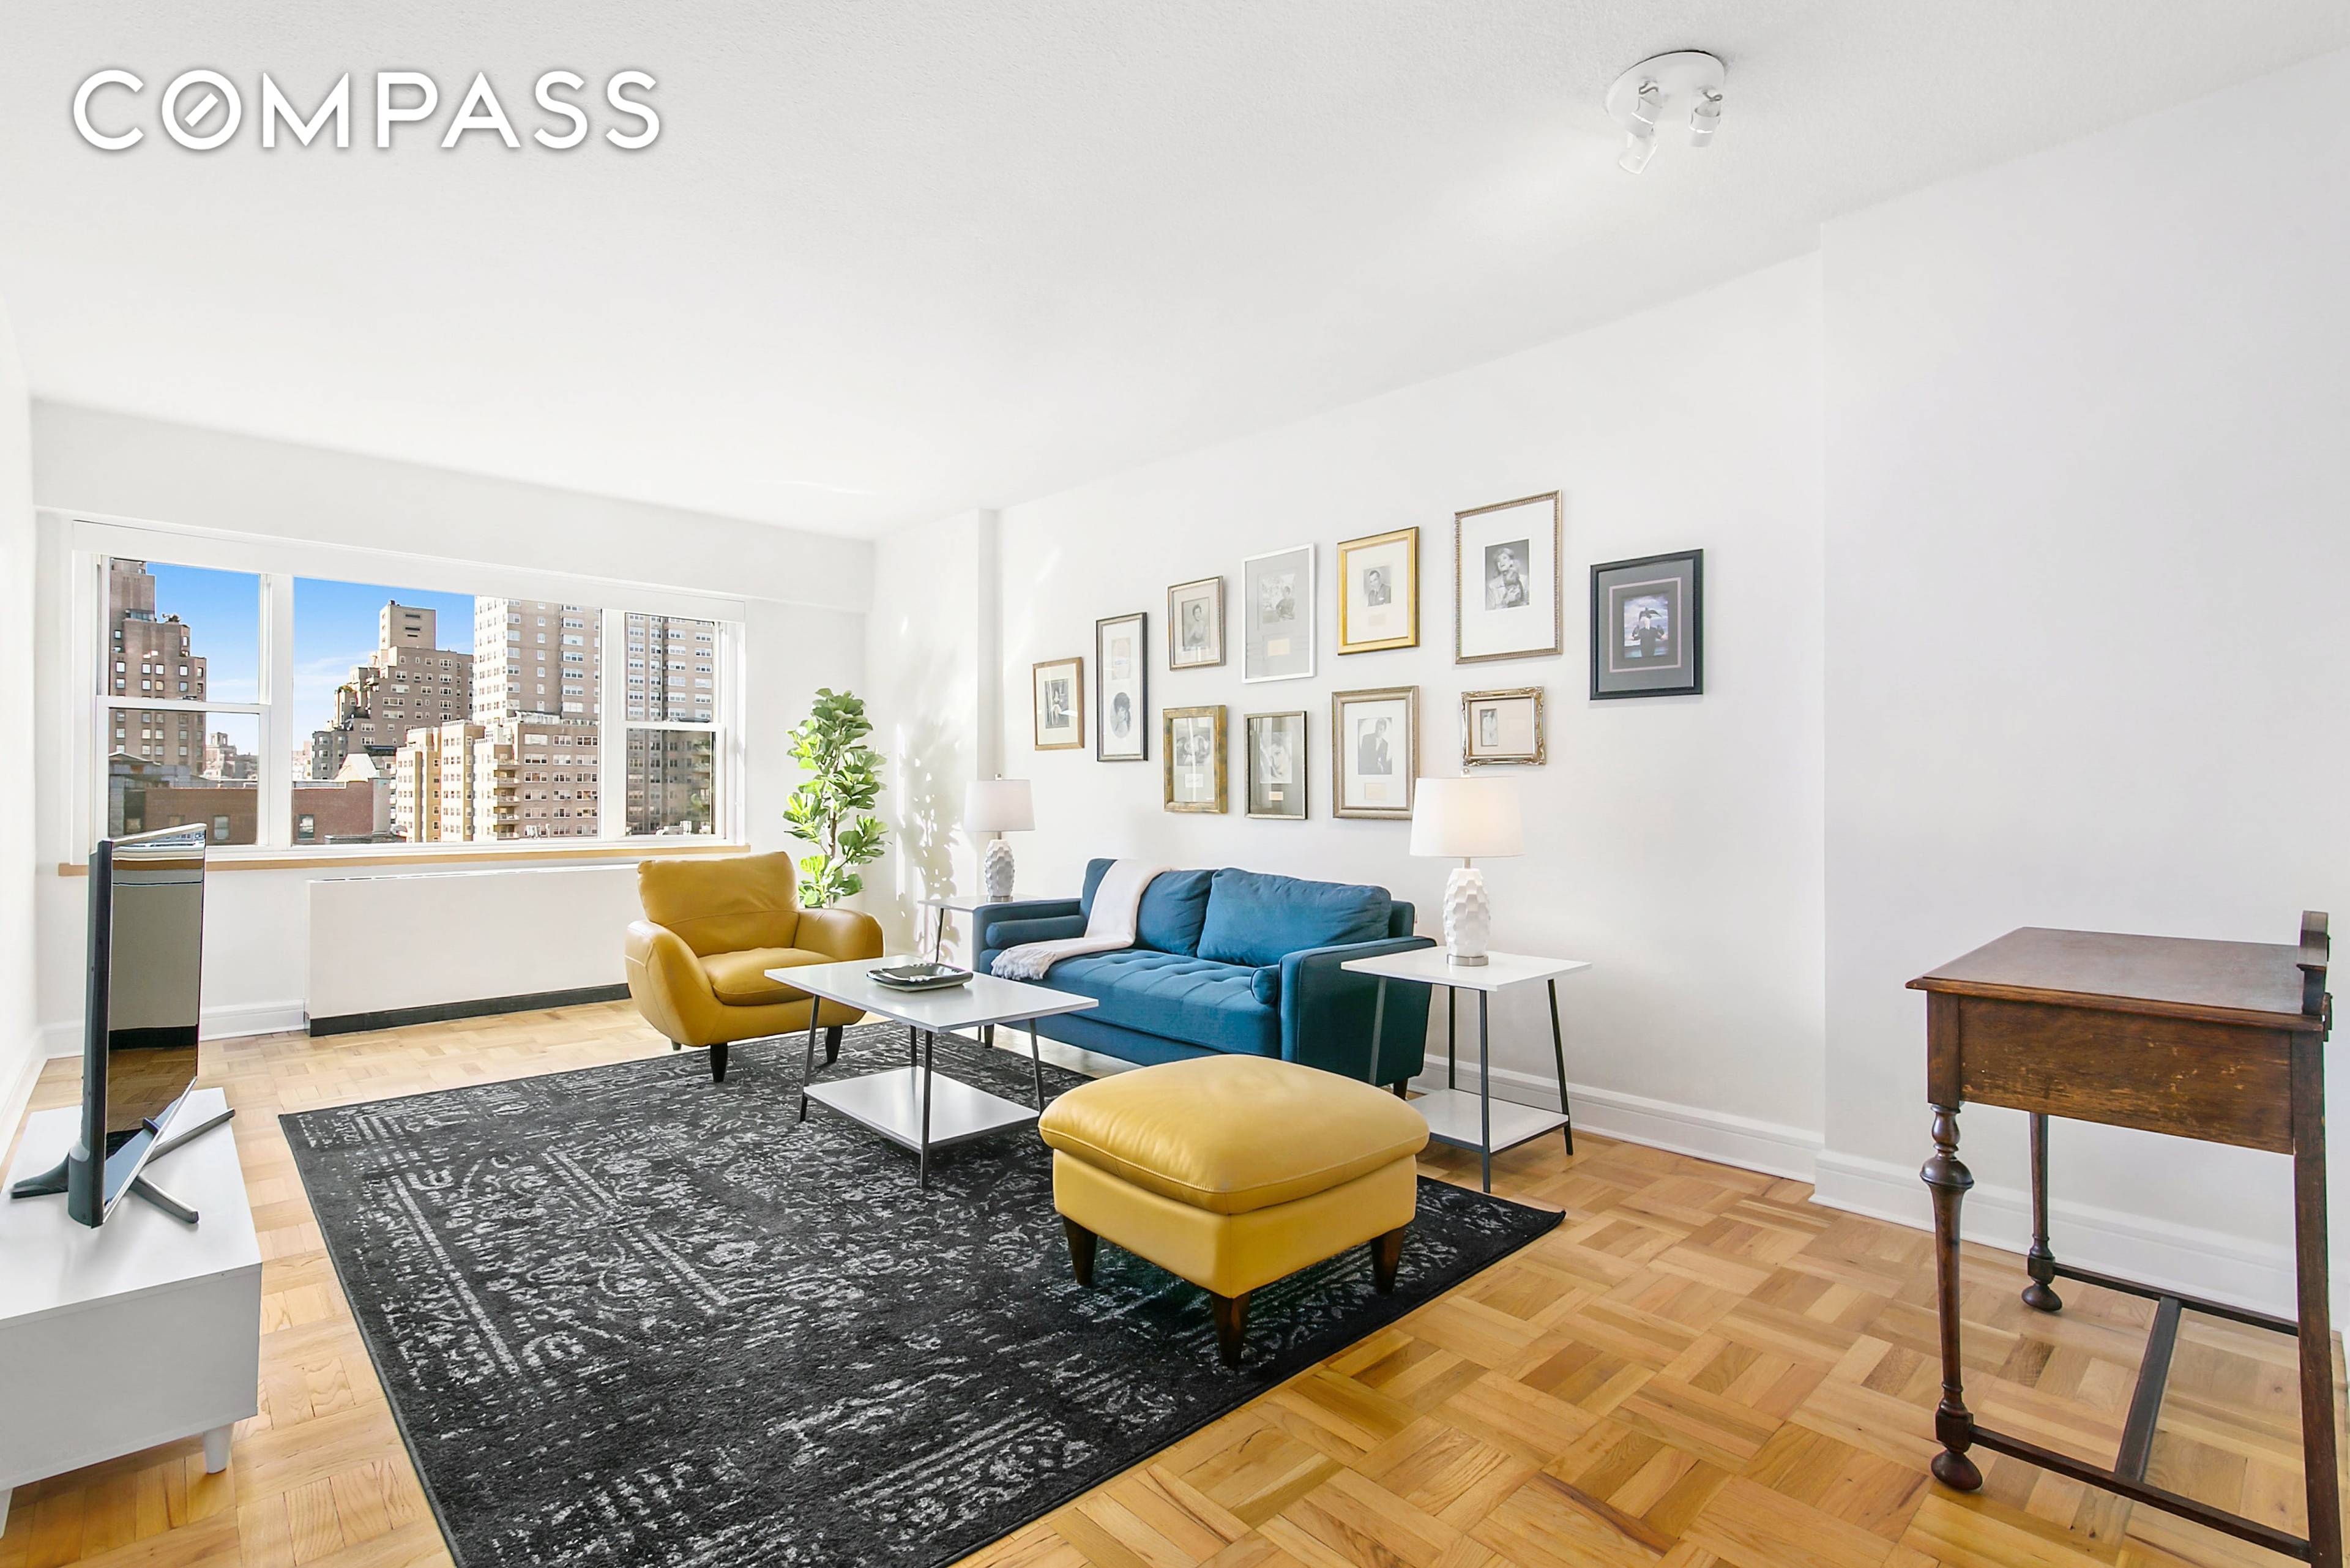 TRUE CONDO RULES Come Home to this Serene amp ; Spacious, Renovated, Greenwich Village One Bedroom.